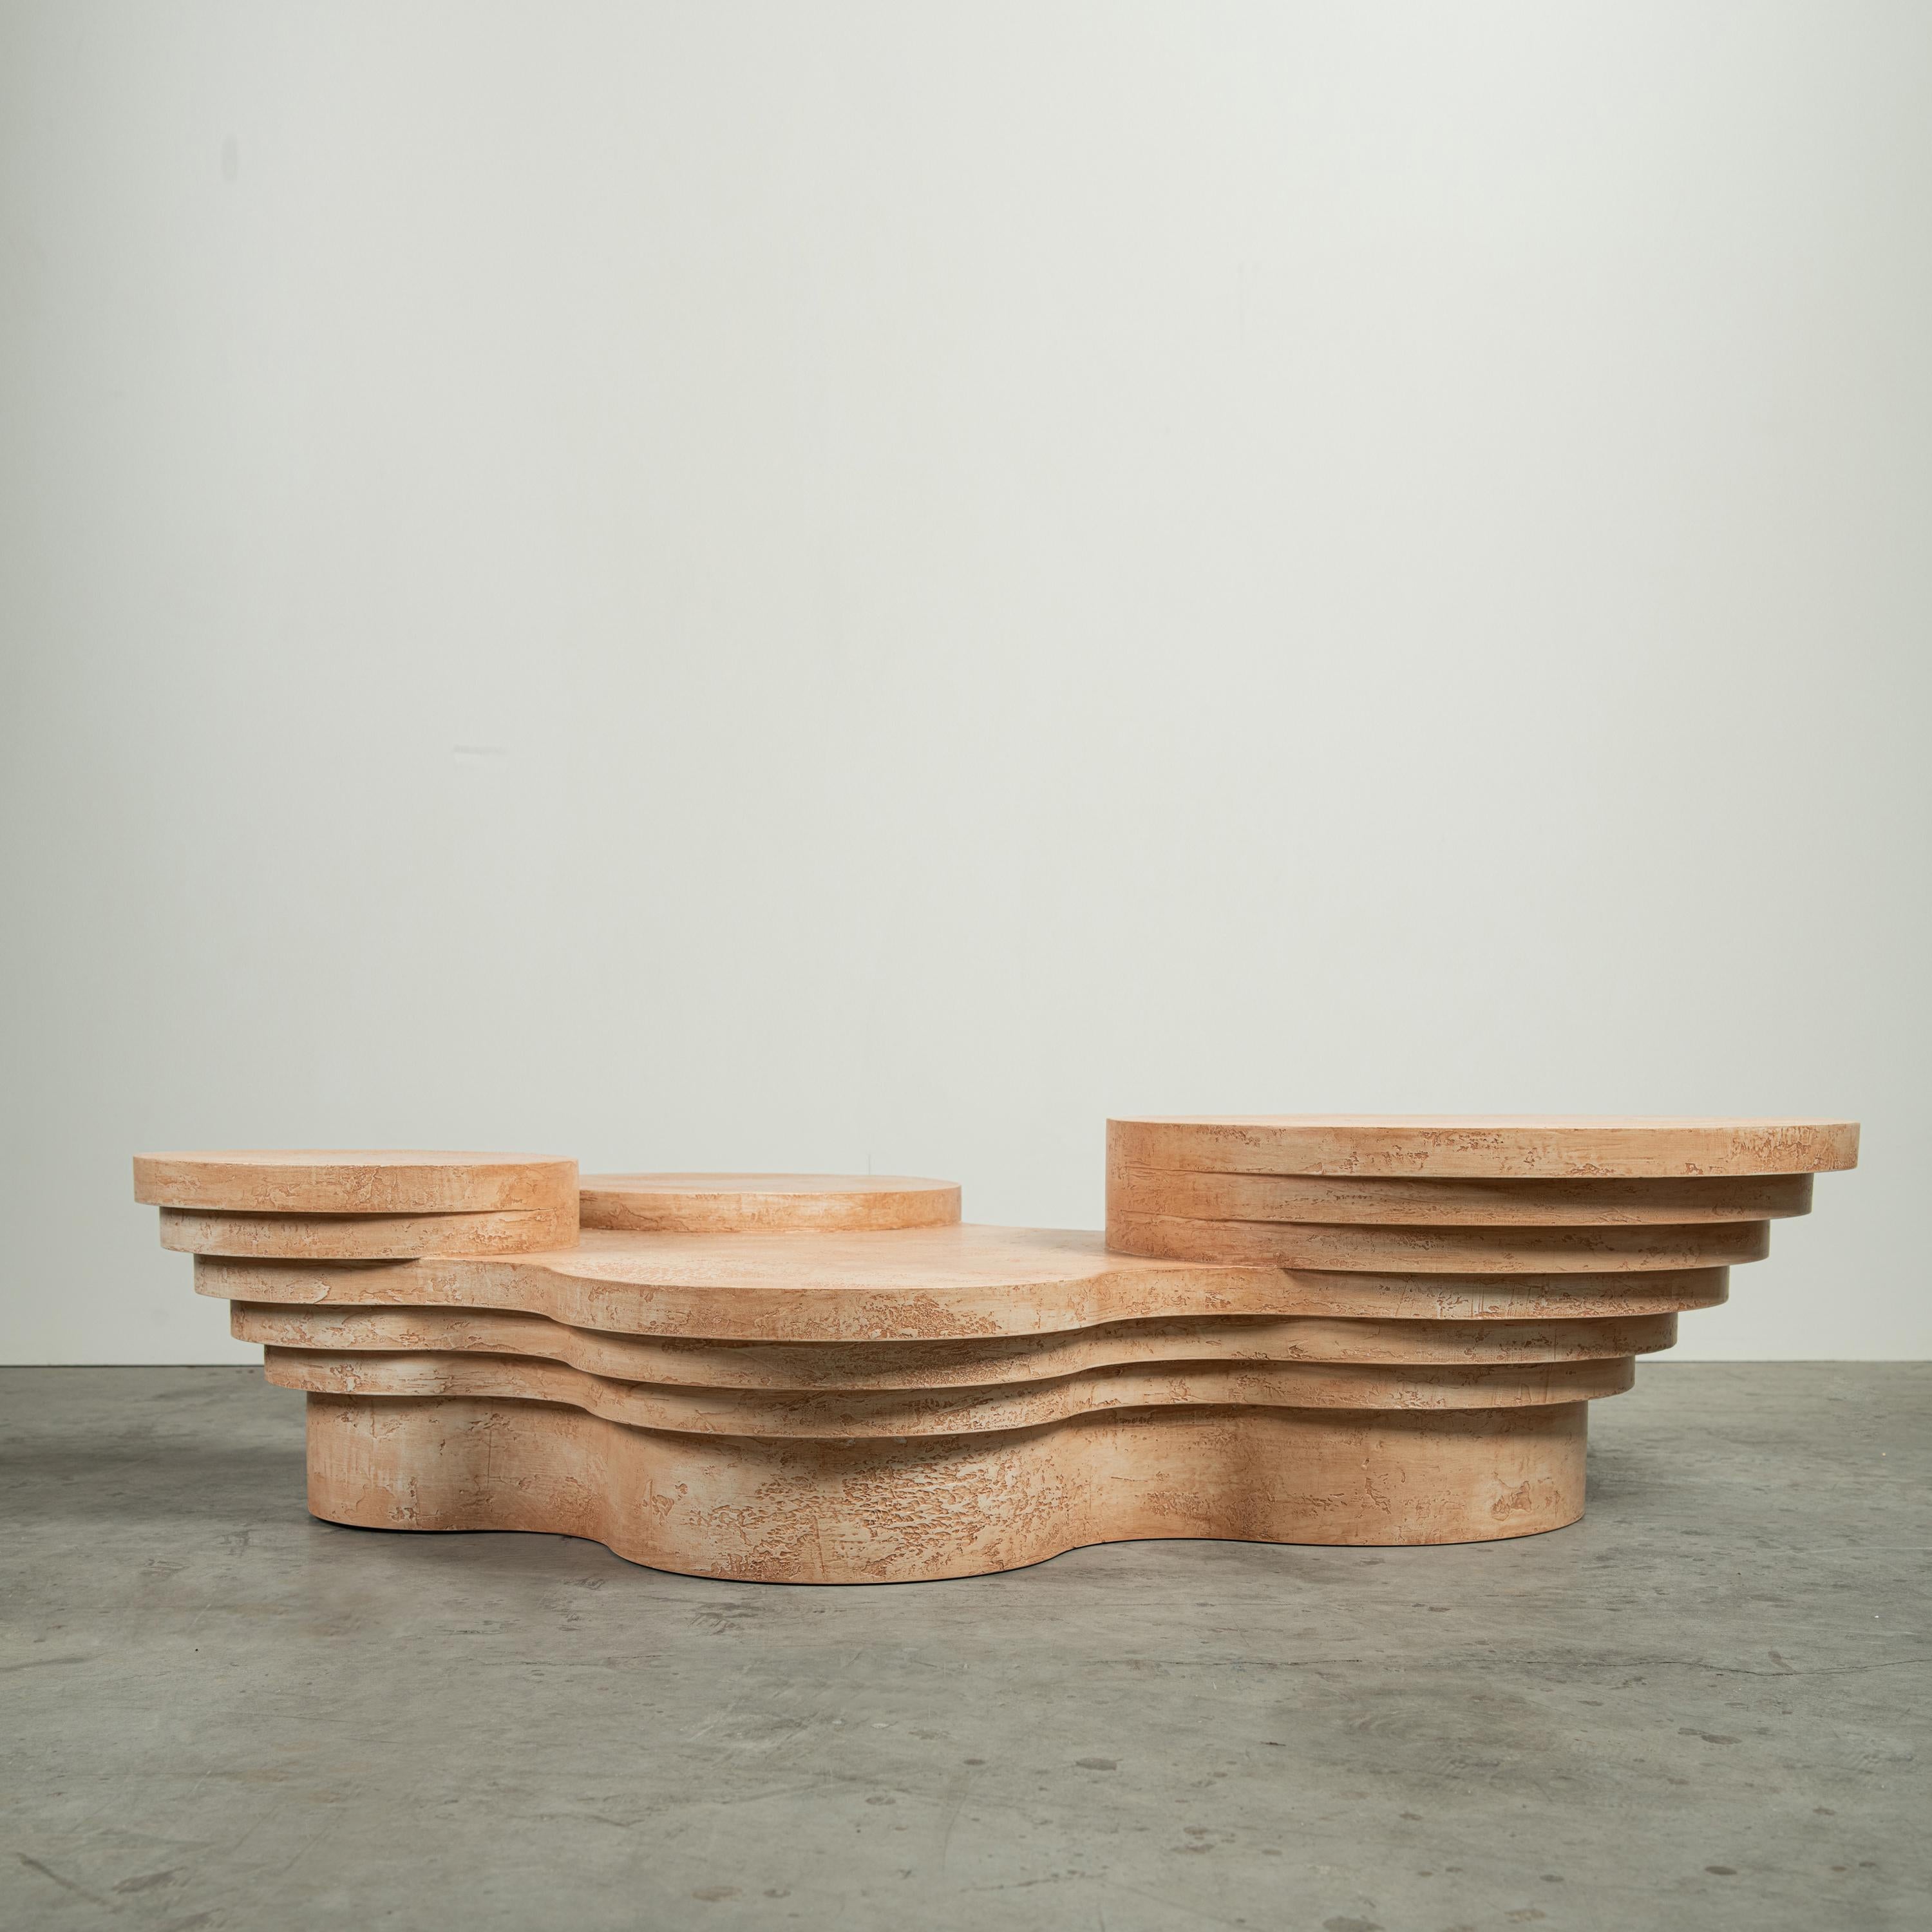 Slice Me Up sculptural coffee table by Pietro Franceschini
Sold exclusively by Galerie Philia
Manufacturer: We Do
Dimensions: W 160 x L 120 x H 36 cm
Materials: Plaster (different finishes)


Pietro Franceschini is an architect and designer